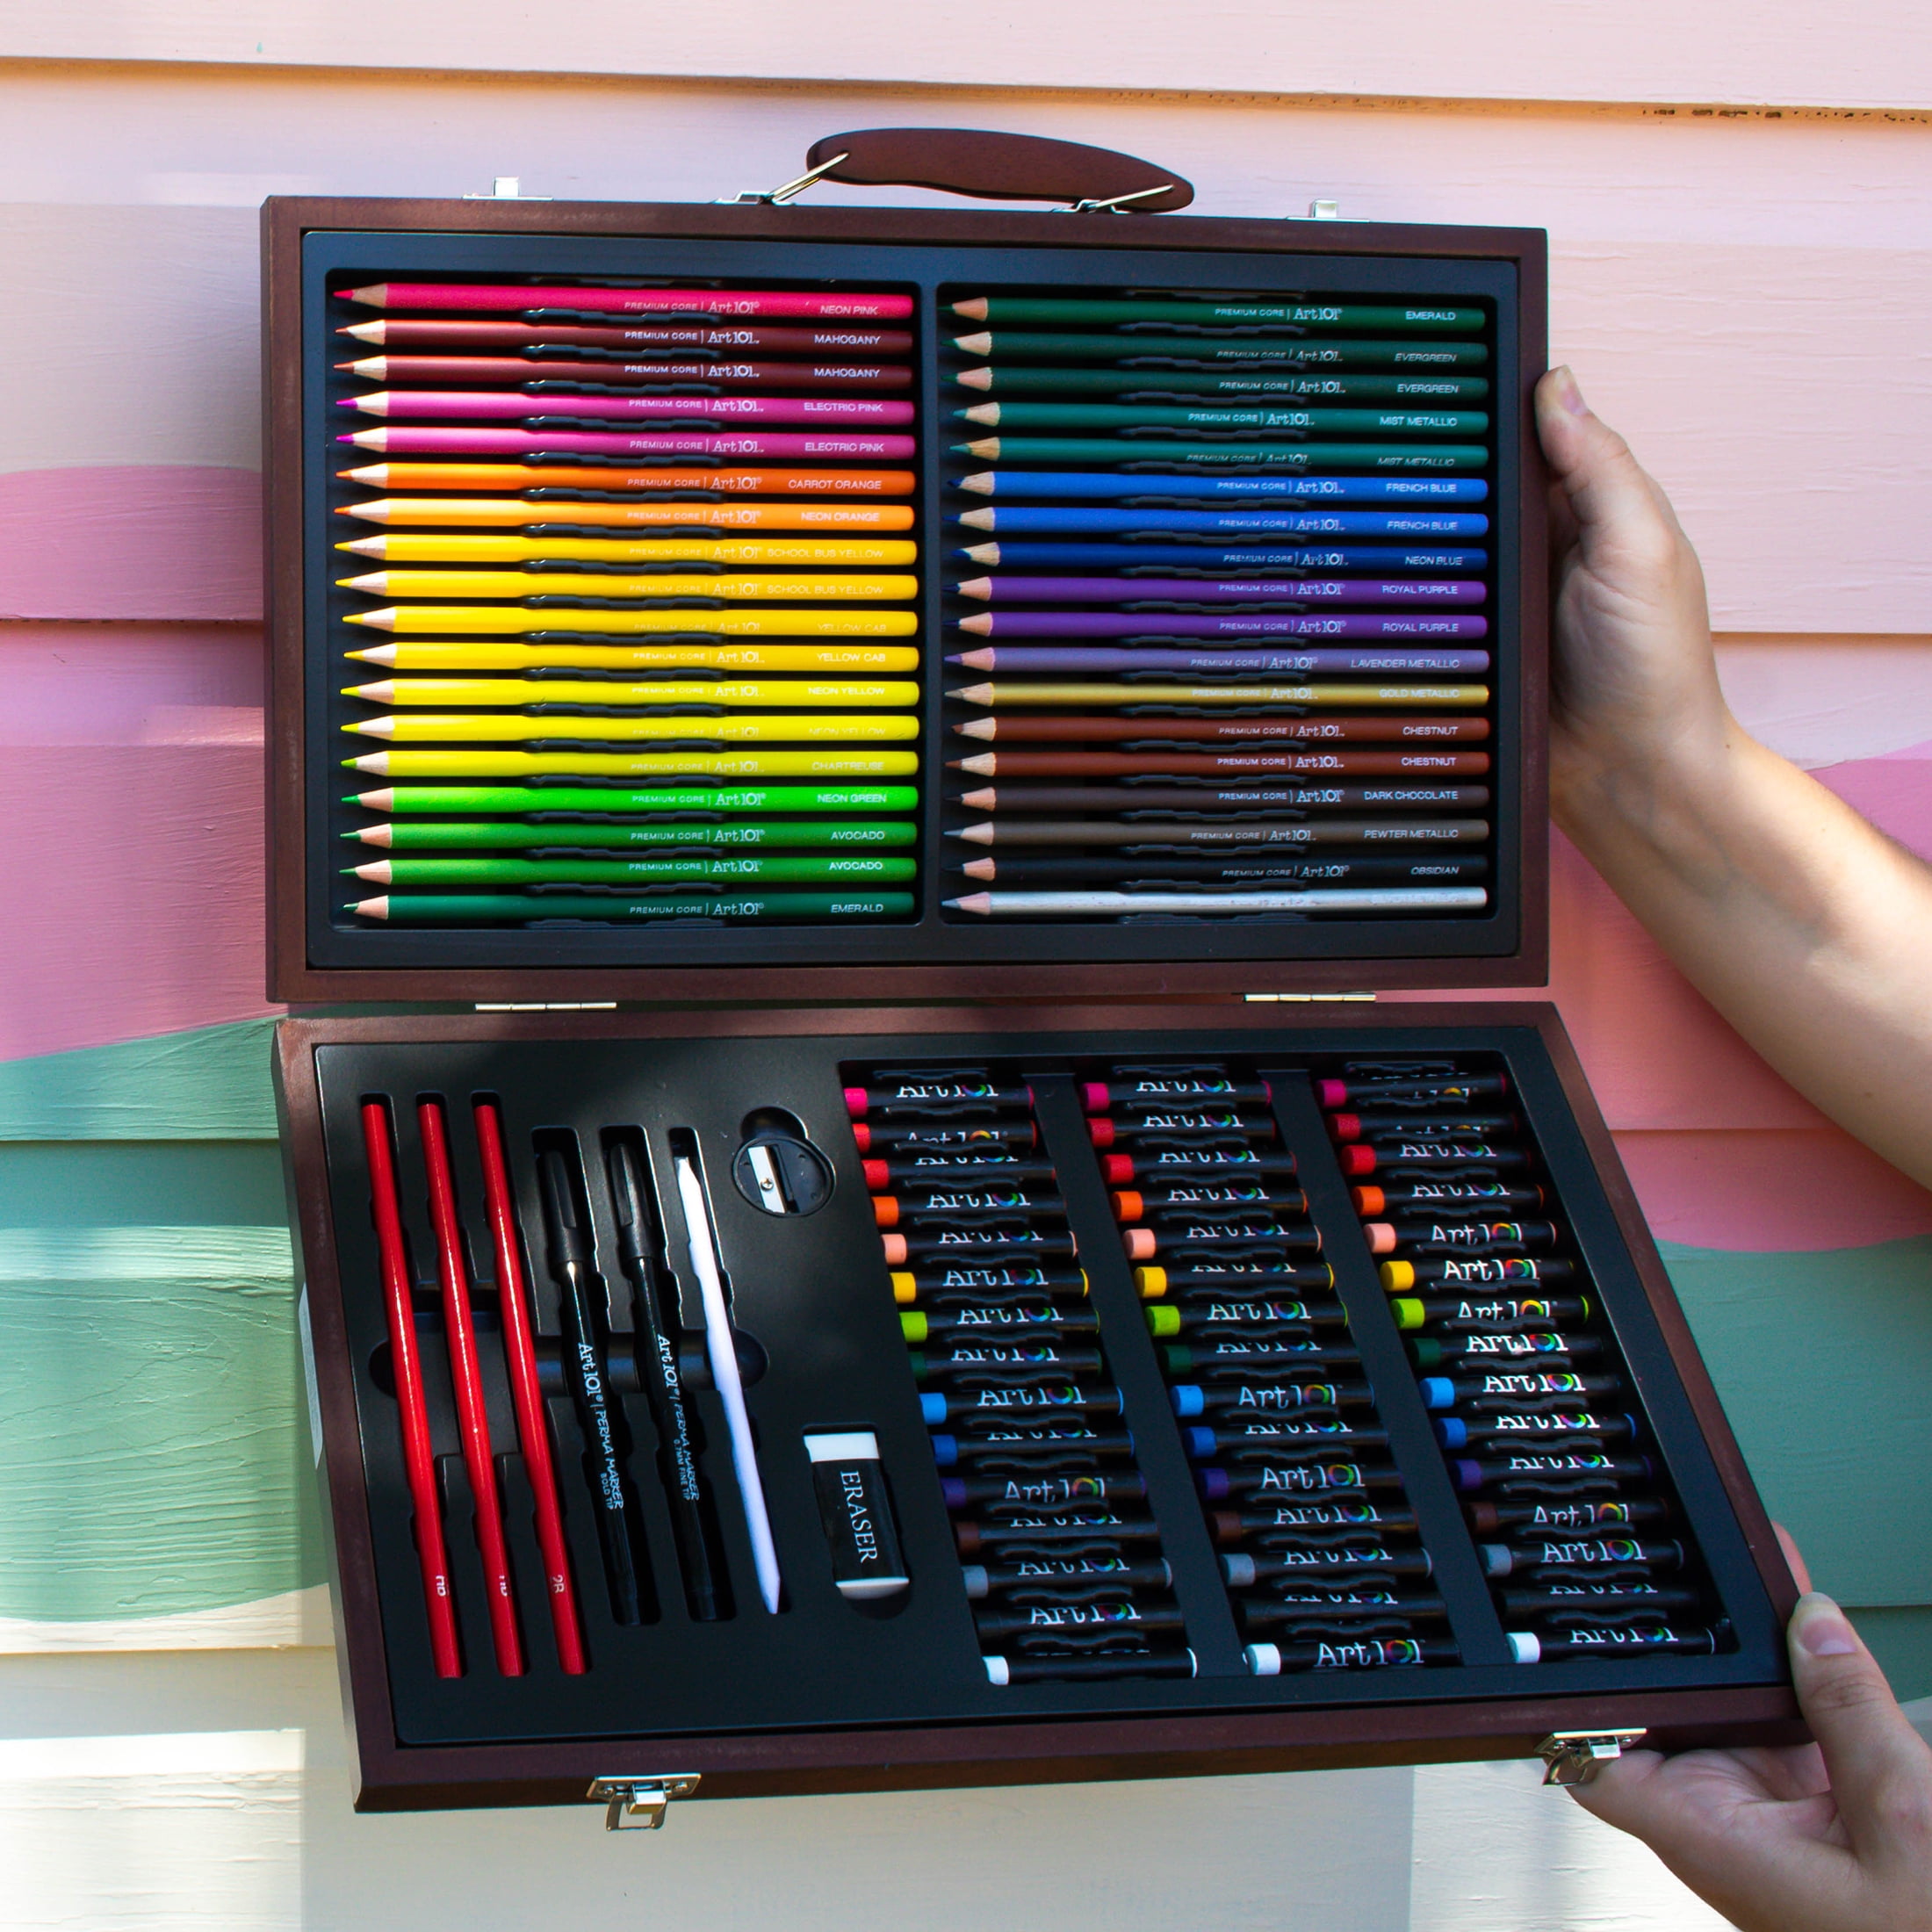 Art 101 USA Deluxe Art Set with 119 Pieces in a Wood Organizer Case,  Includes Color